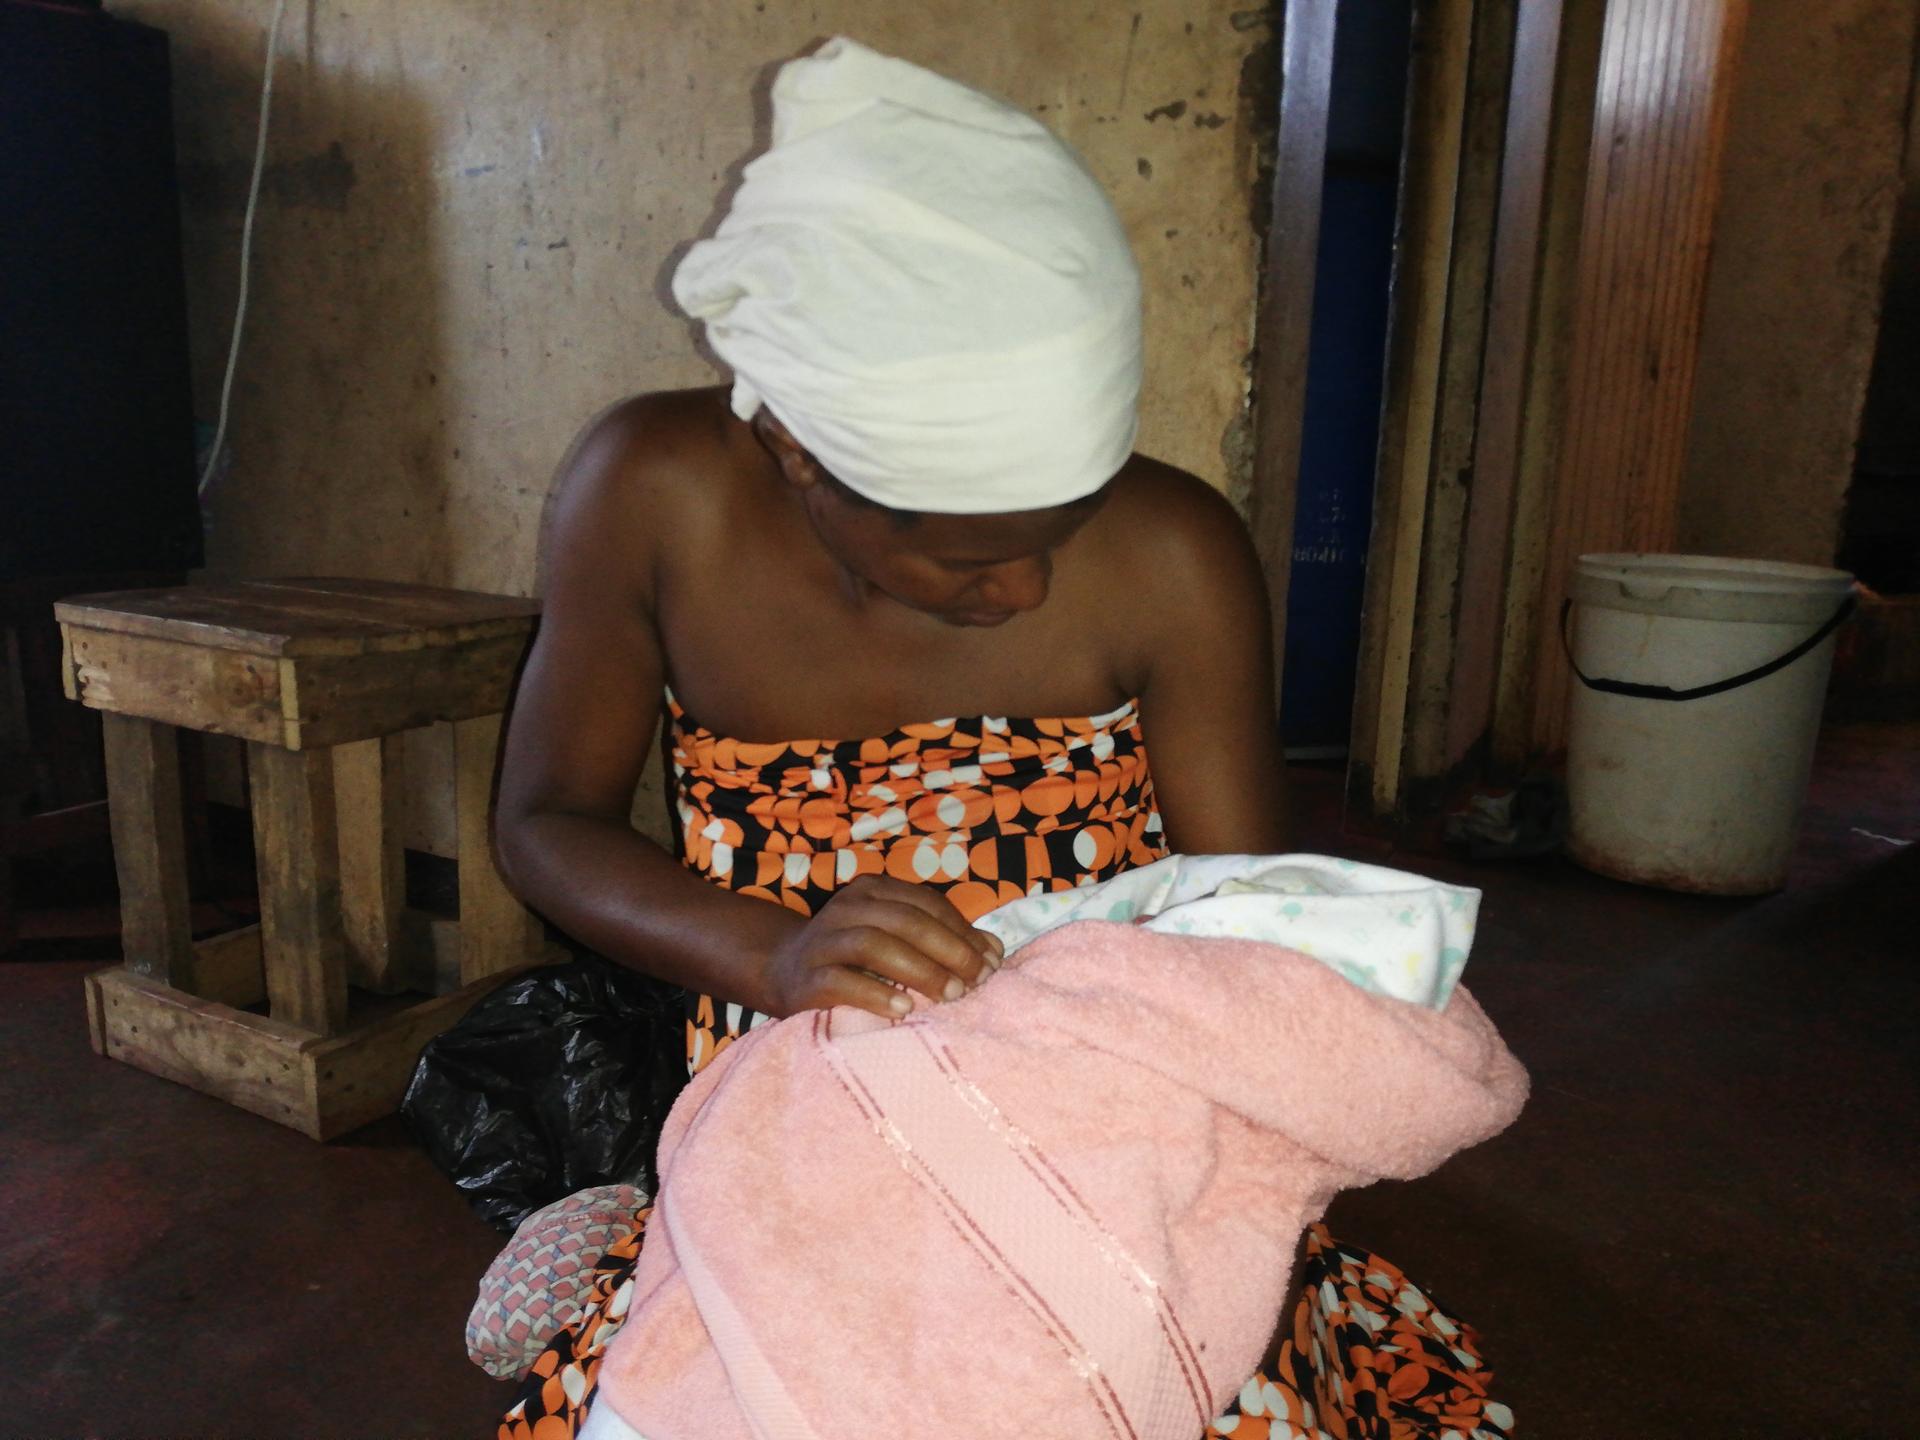 A young woman wrapped in a towel holds her newborn baby